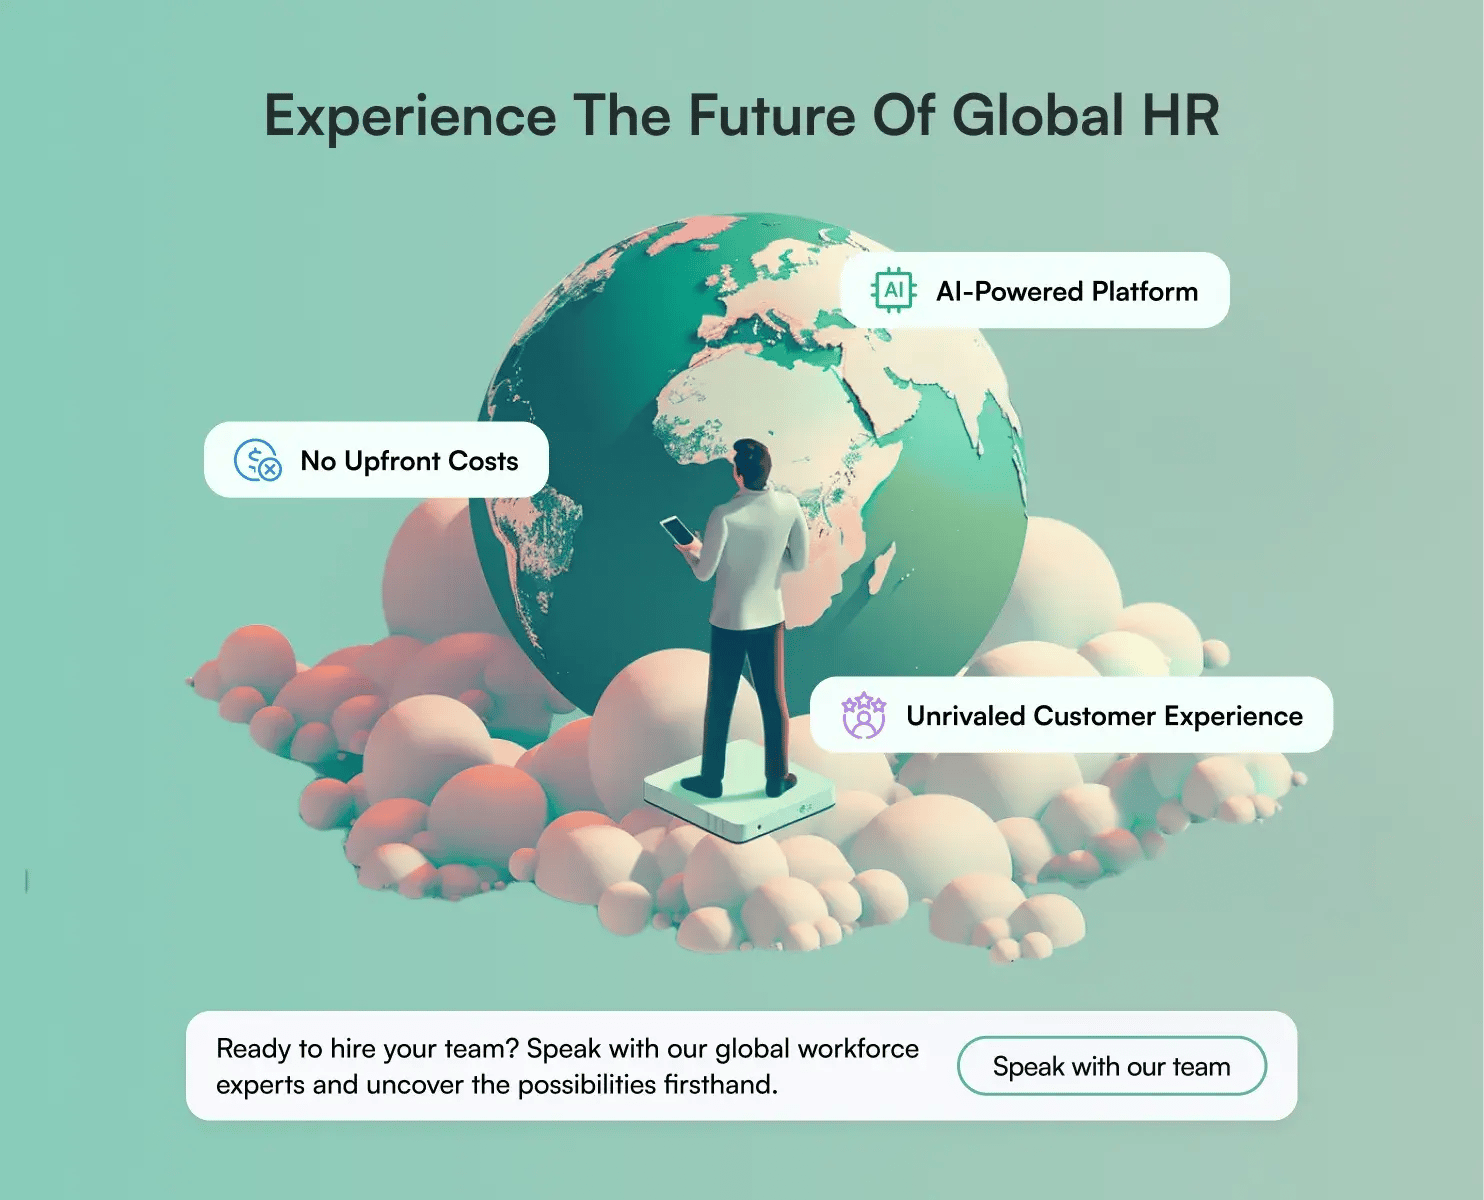 Experience the Future of Global HR